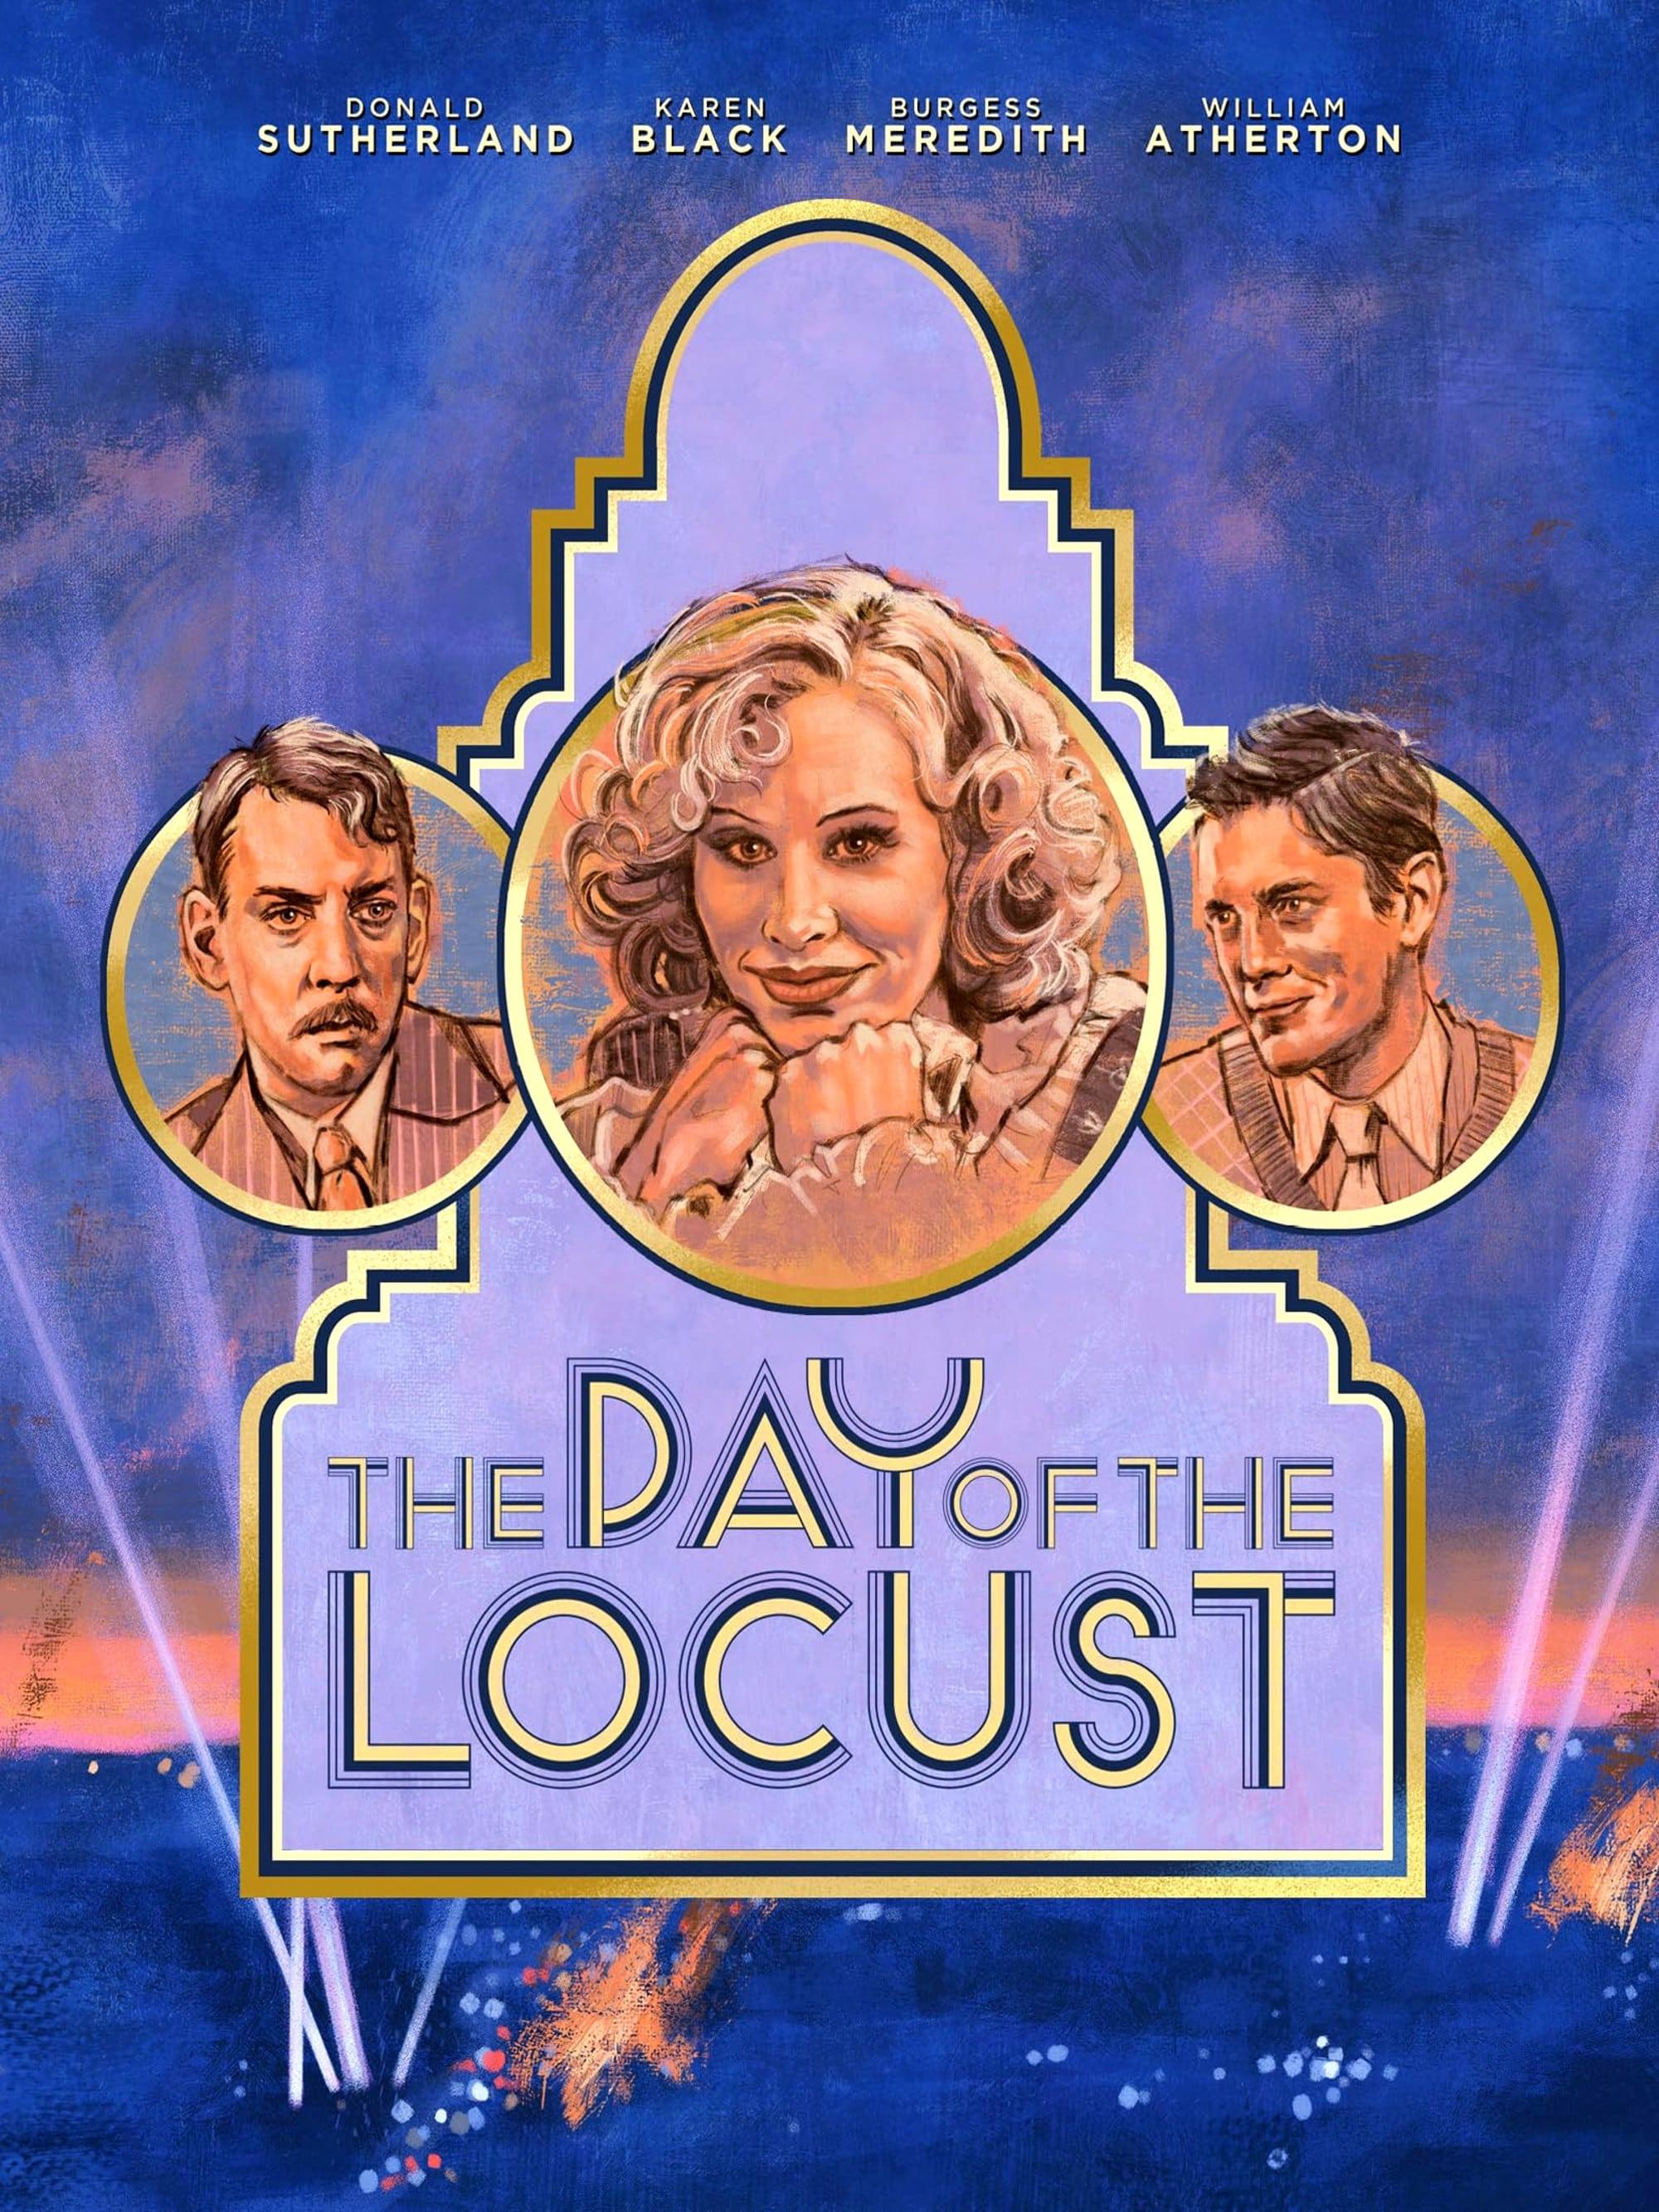 The Day of the Locust poster